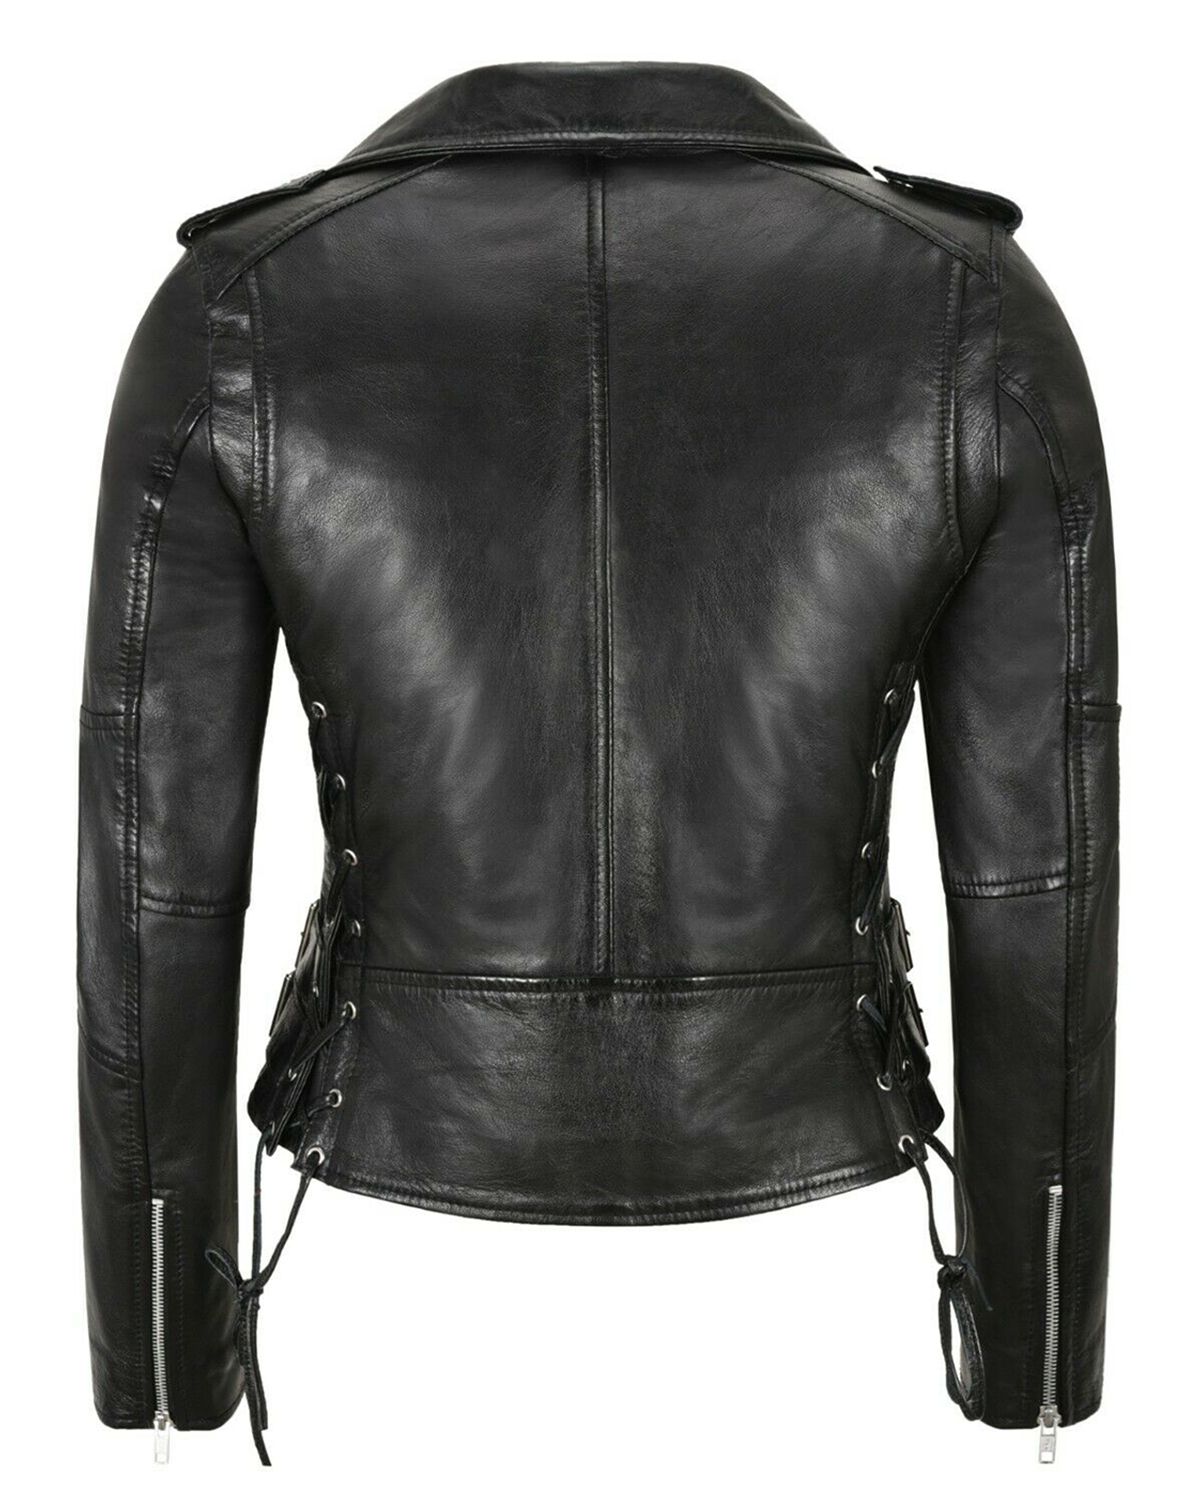 black leather jacket for women genuine leather jacket women motorcycle jacket women biker jacket for women zipper jacket for women high quality jacket women gift for her valentines gift